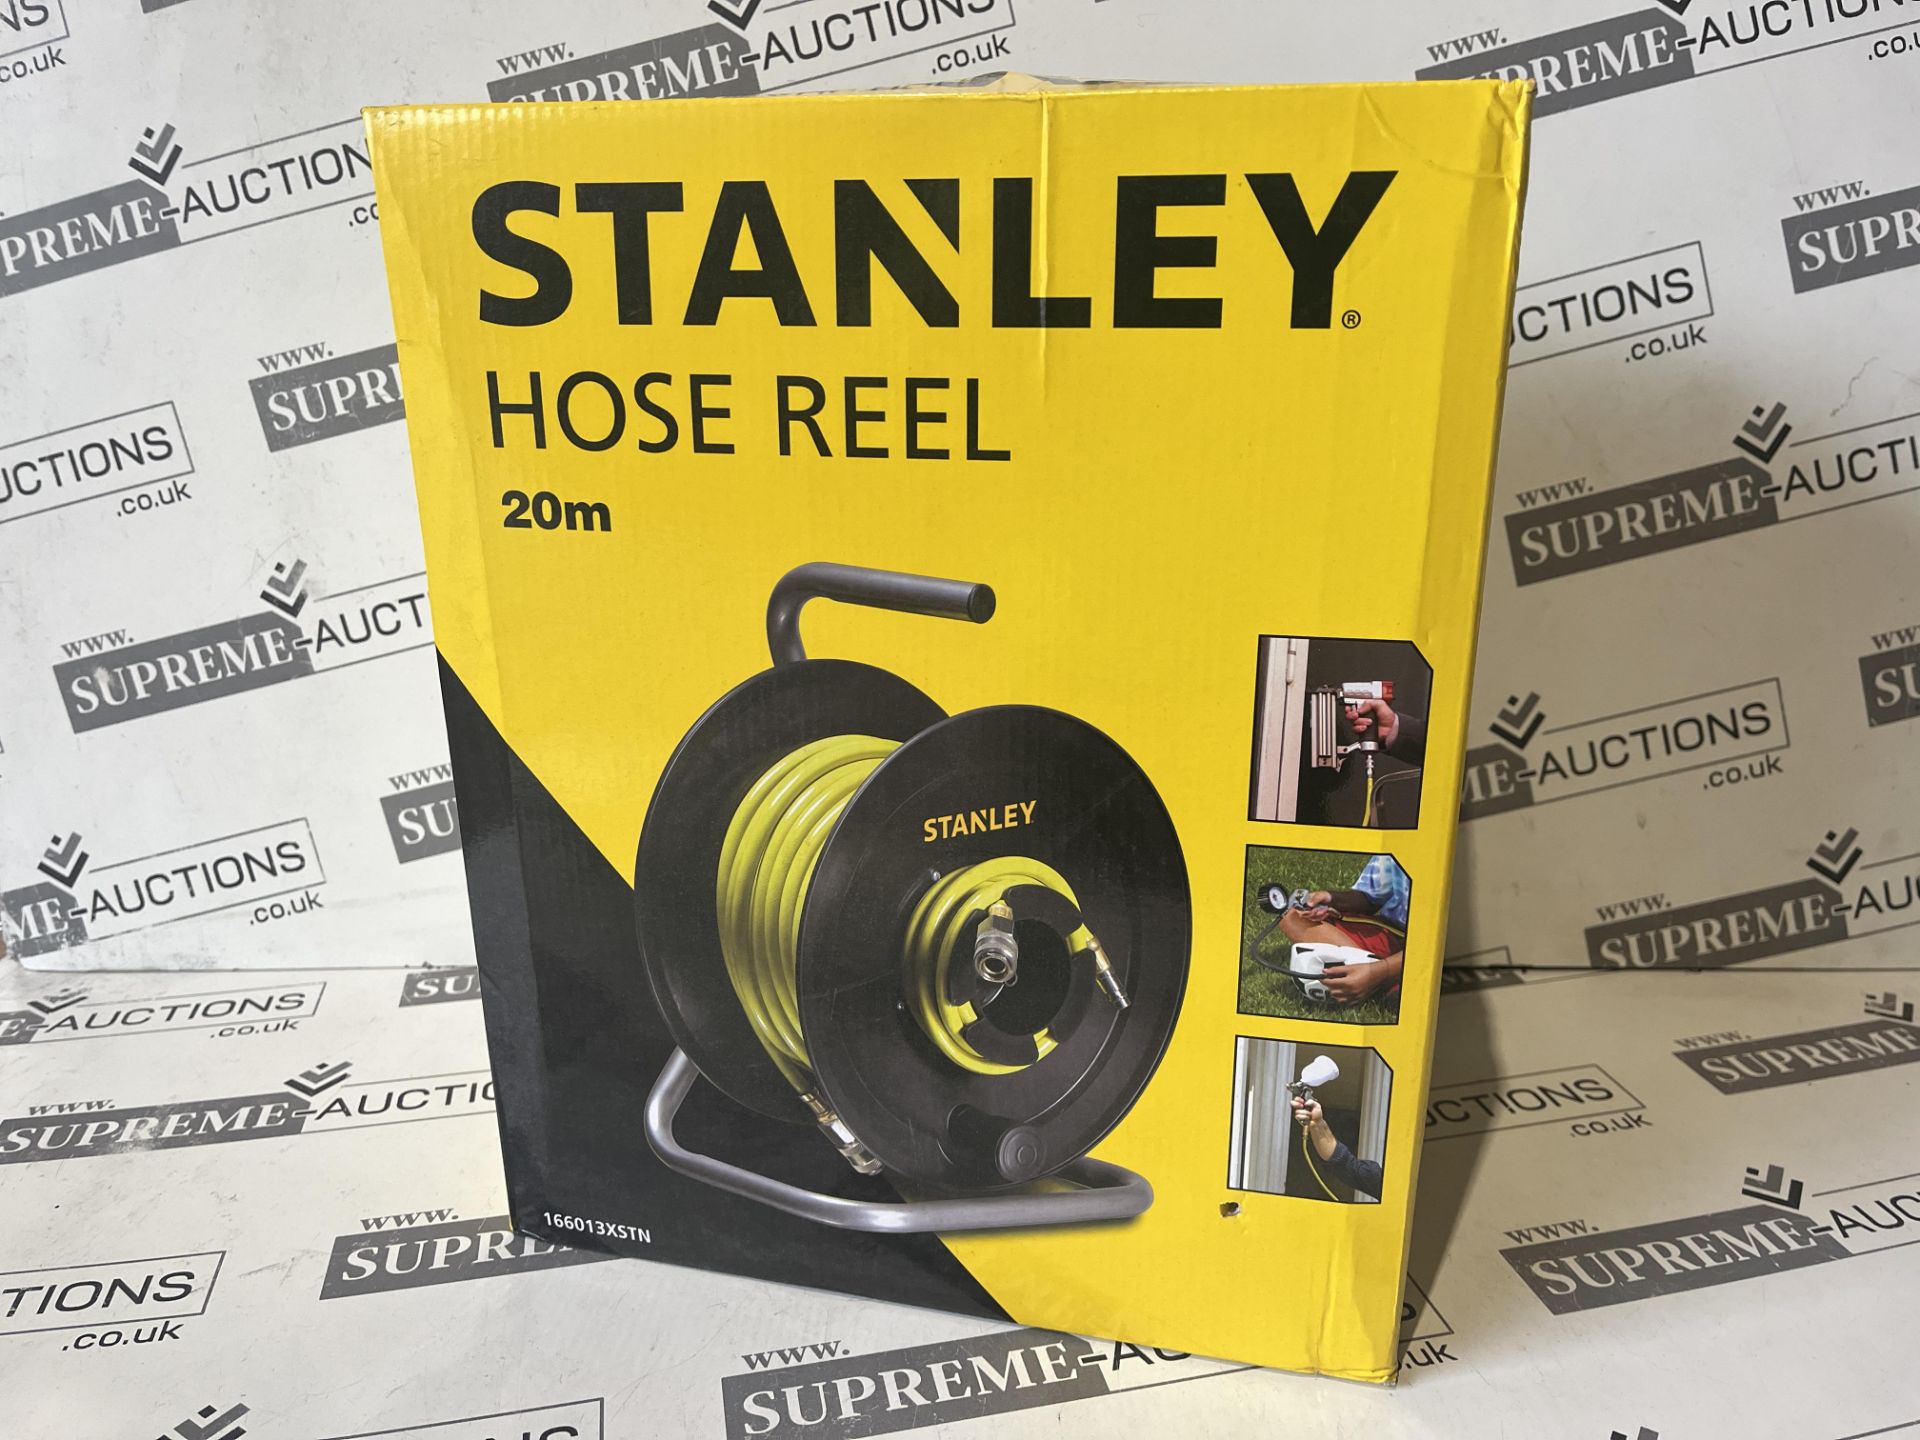 2 X Brand New Stanley Compressed Air Hose Reel 20 meters, With pneumatic quick coupling and - Image 6 of 6